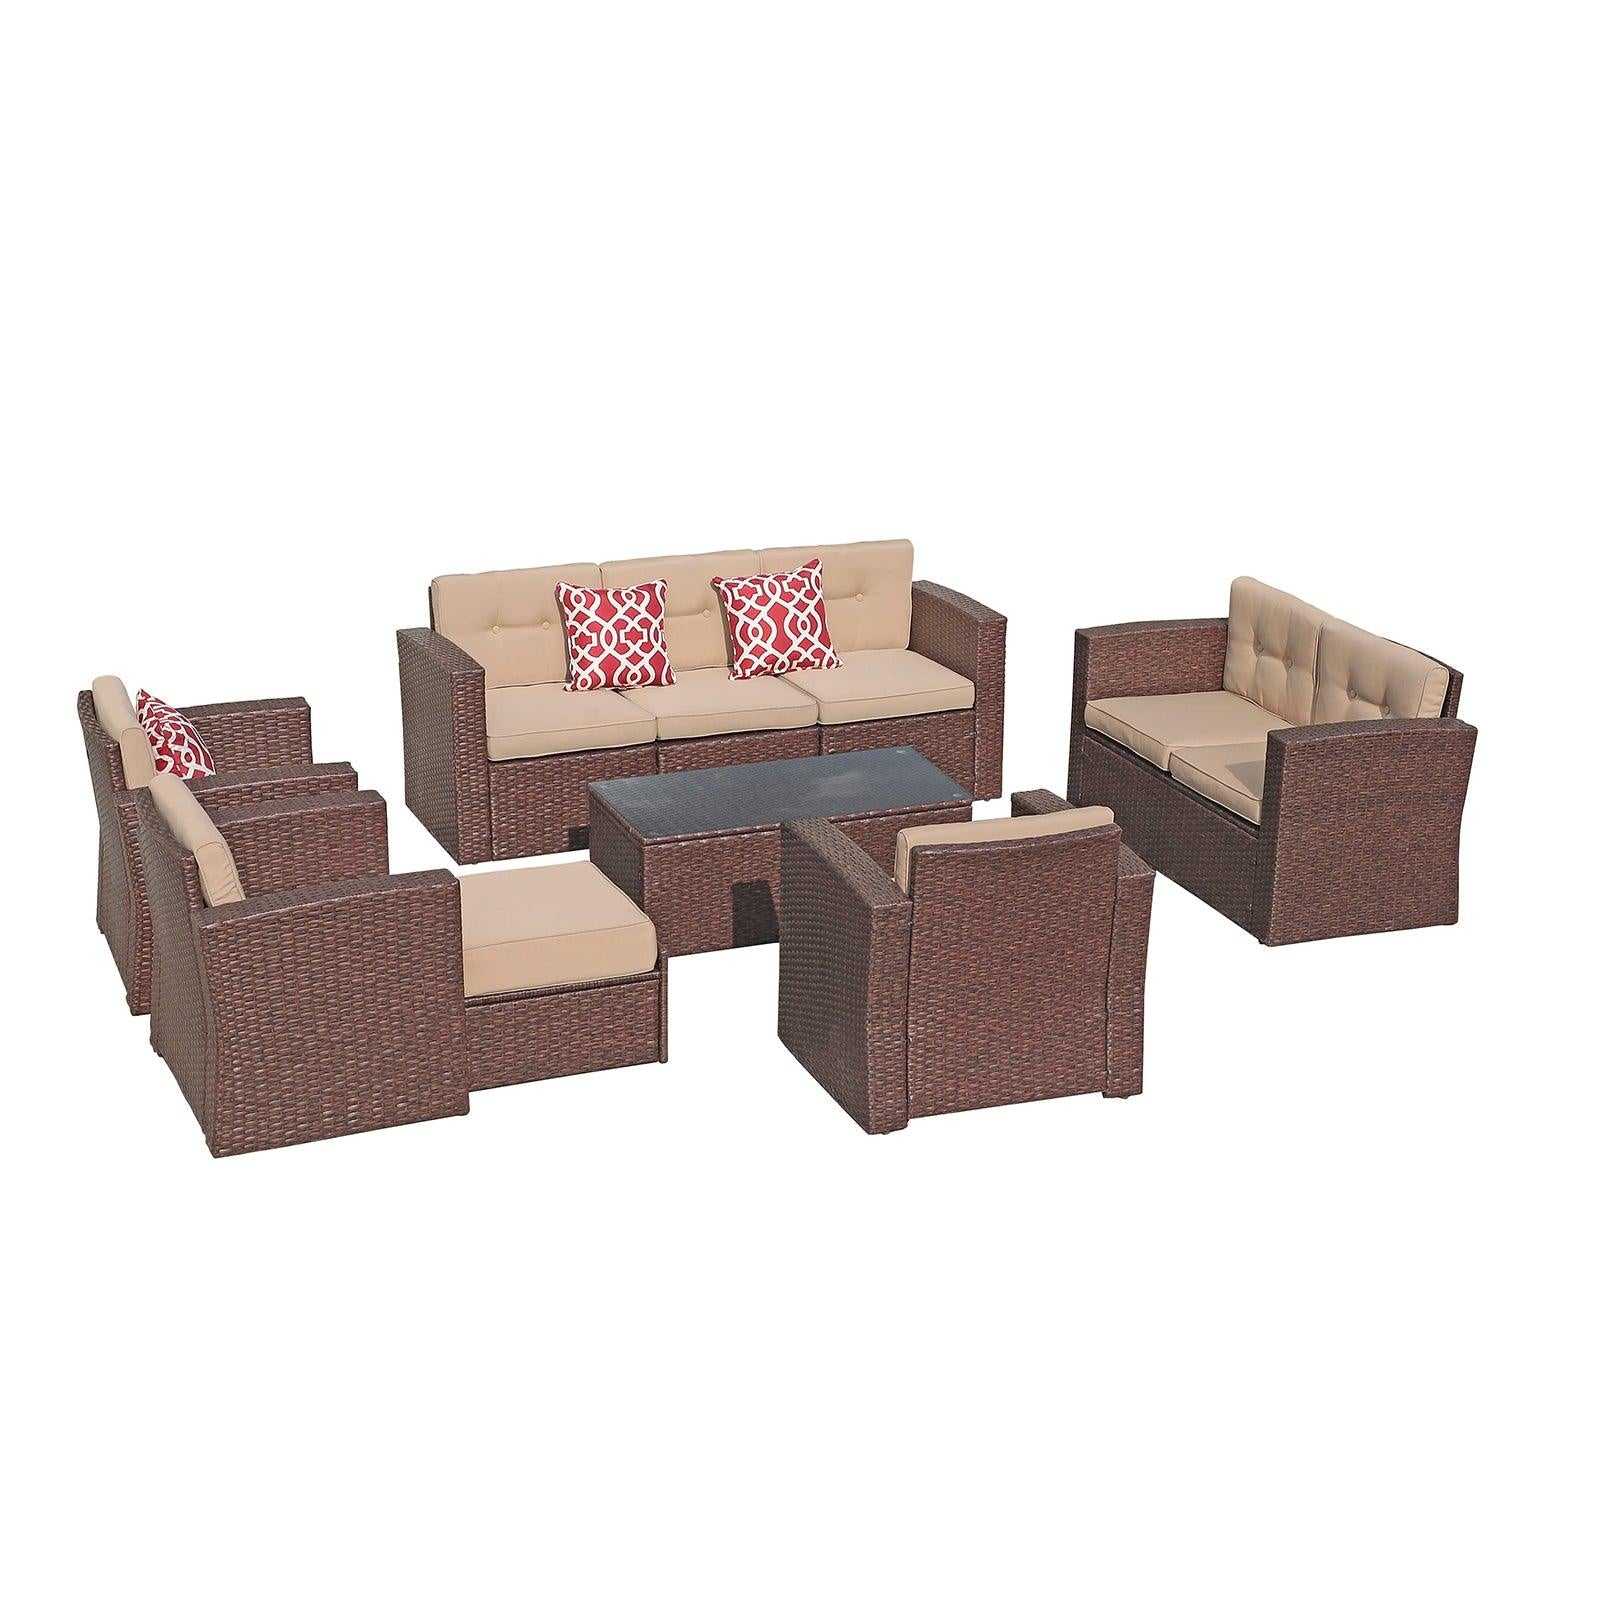 San Terraza 10-pc. Outdoor Conversation Sets with Loveseat sale hot 